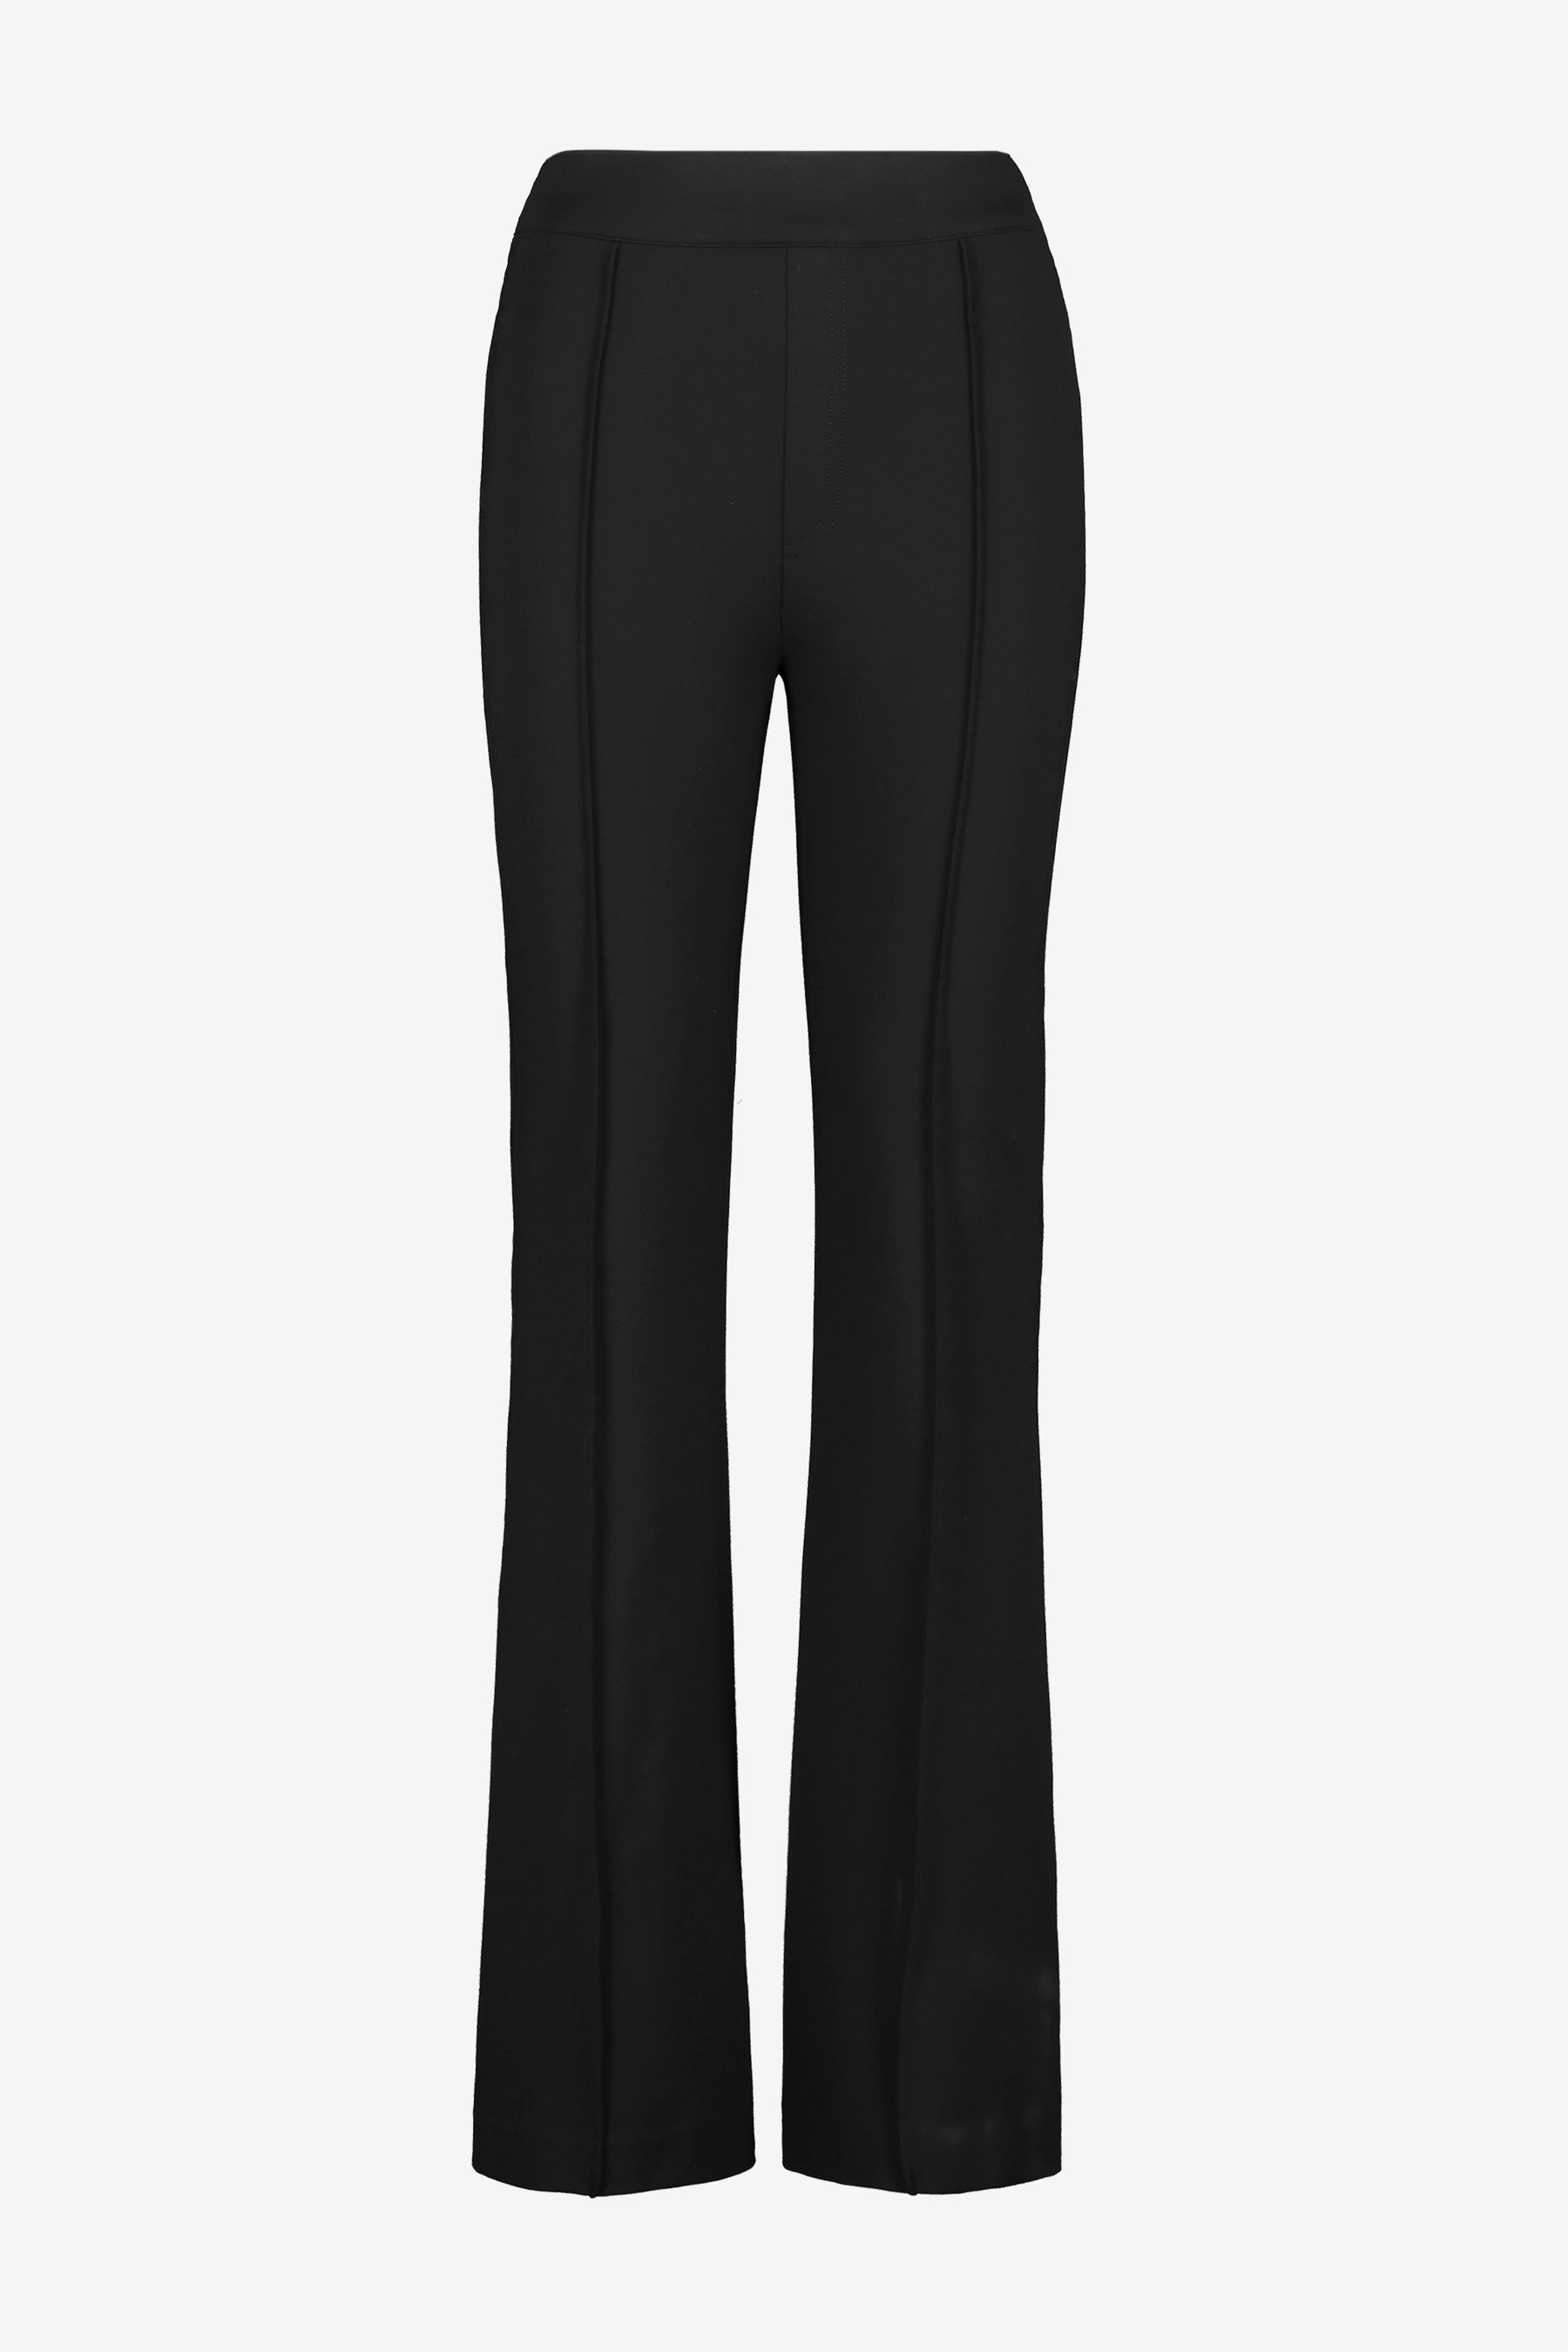 Buy SPANX® Medium Control The Perfect Trousers, High Rise Flare from ...